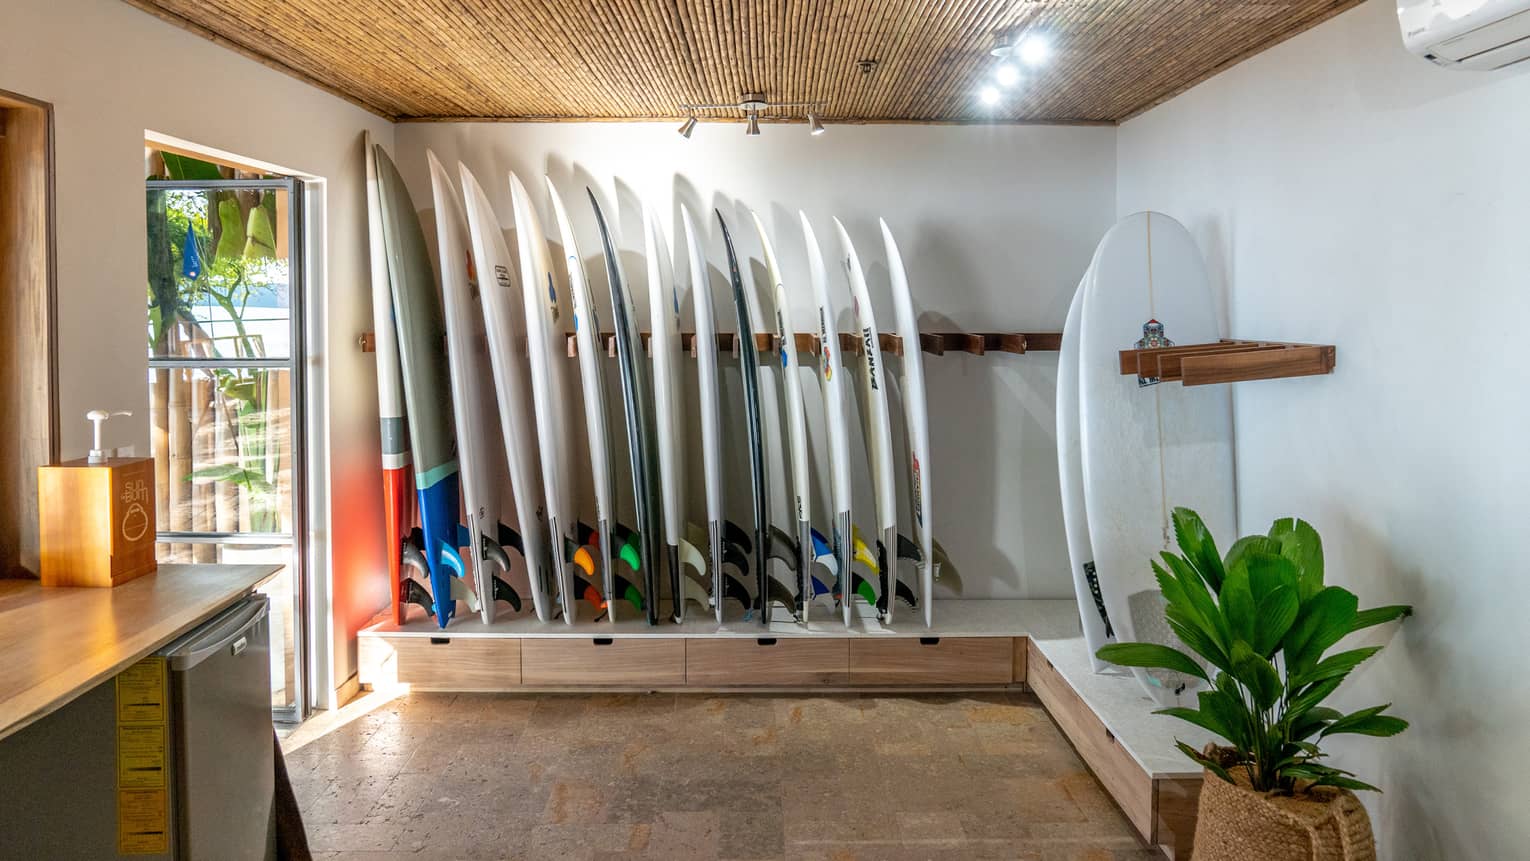 Interior of a small surf shop with crisp white walls, bamboo ceiling and a row of surfboards lined up along the wall